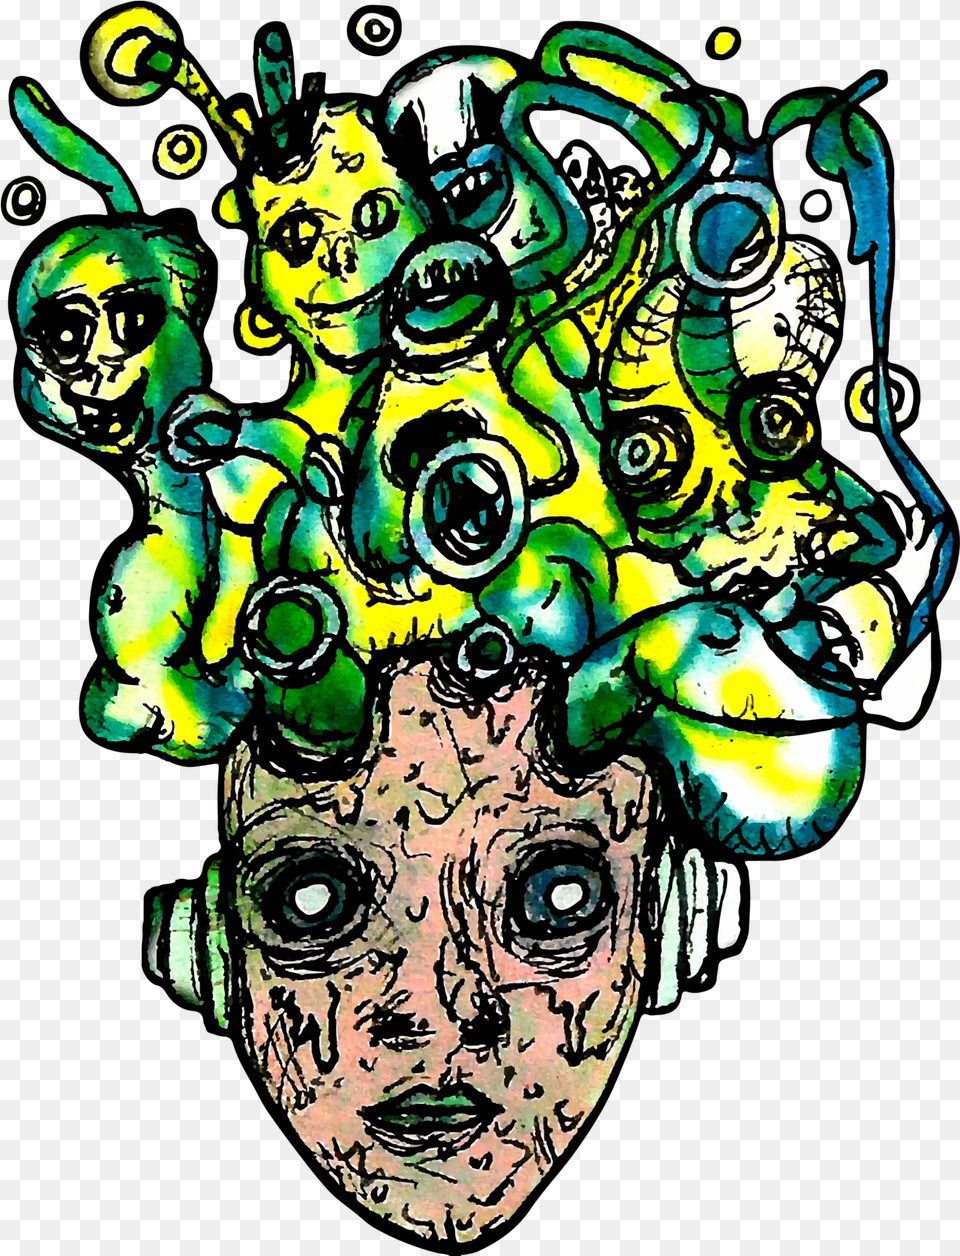 Psychedelic Trippy Art Tumblr Creepy Trippy, Graphics, Drawing, Doodle, Collage Free Transparent Png